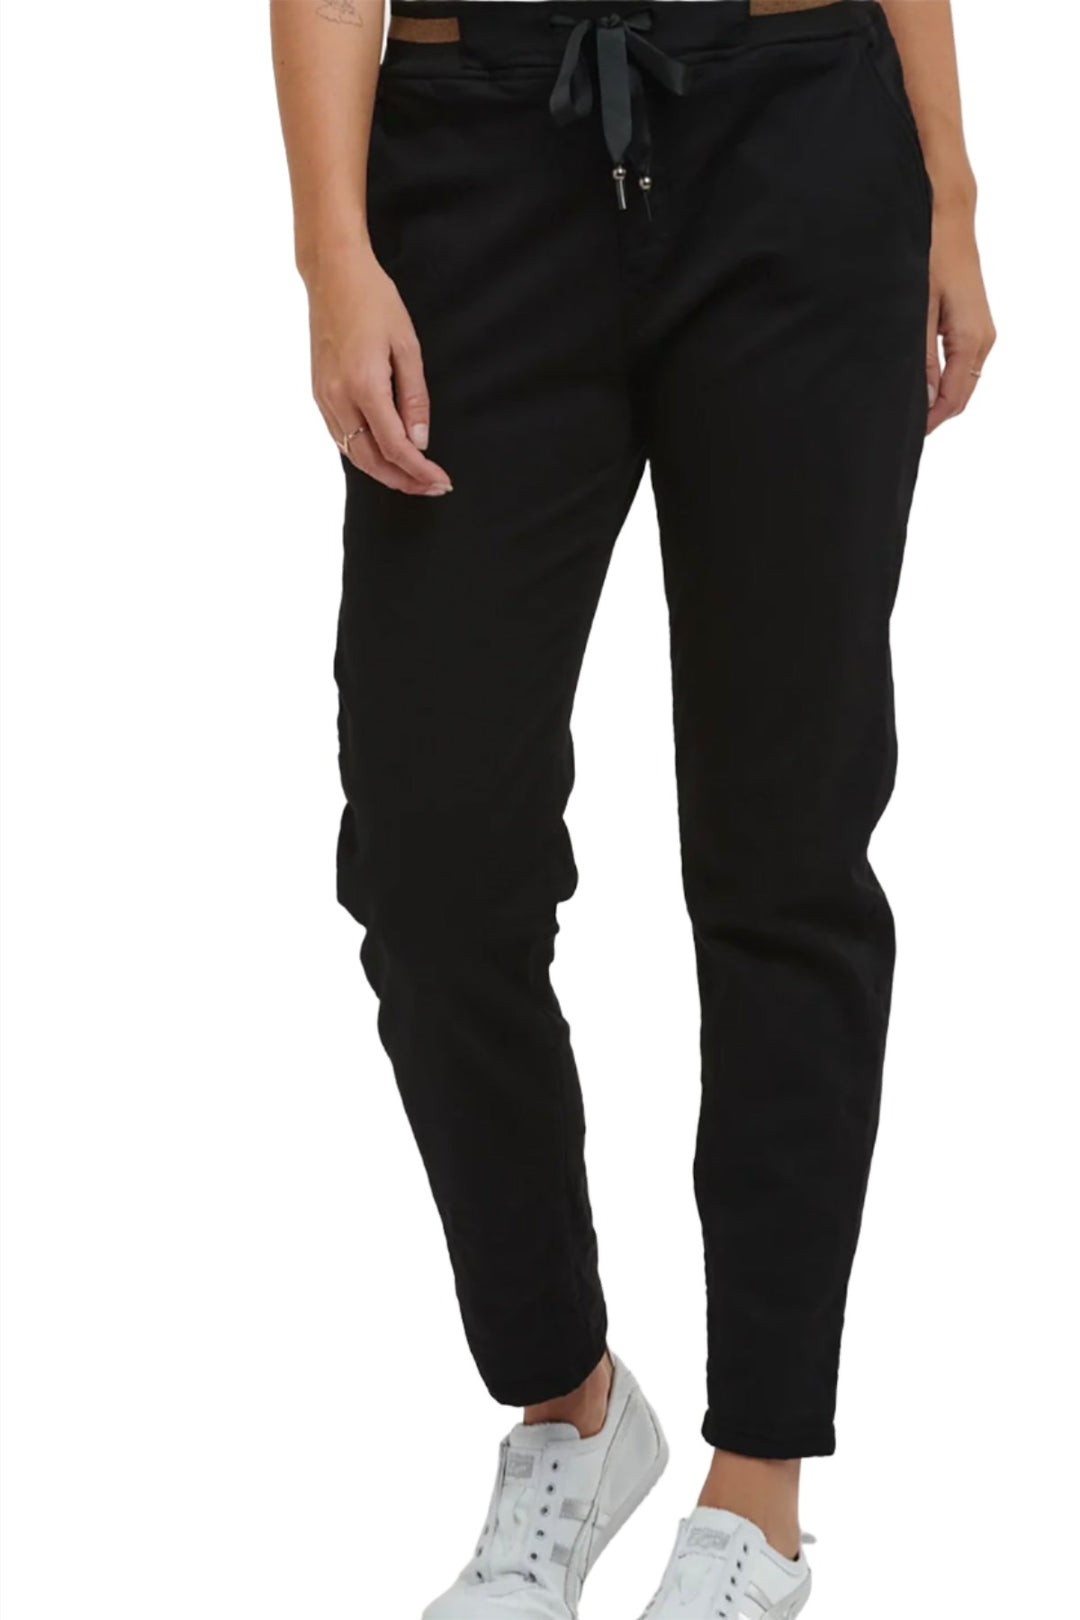 Woman wearing drawstring, slim leg pants with side vent pockets in Black colour. Sold and shipped by Pizazz Boutique, Nelson Bay, NSW.